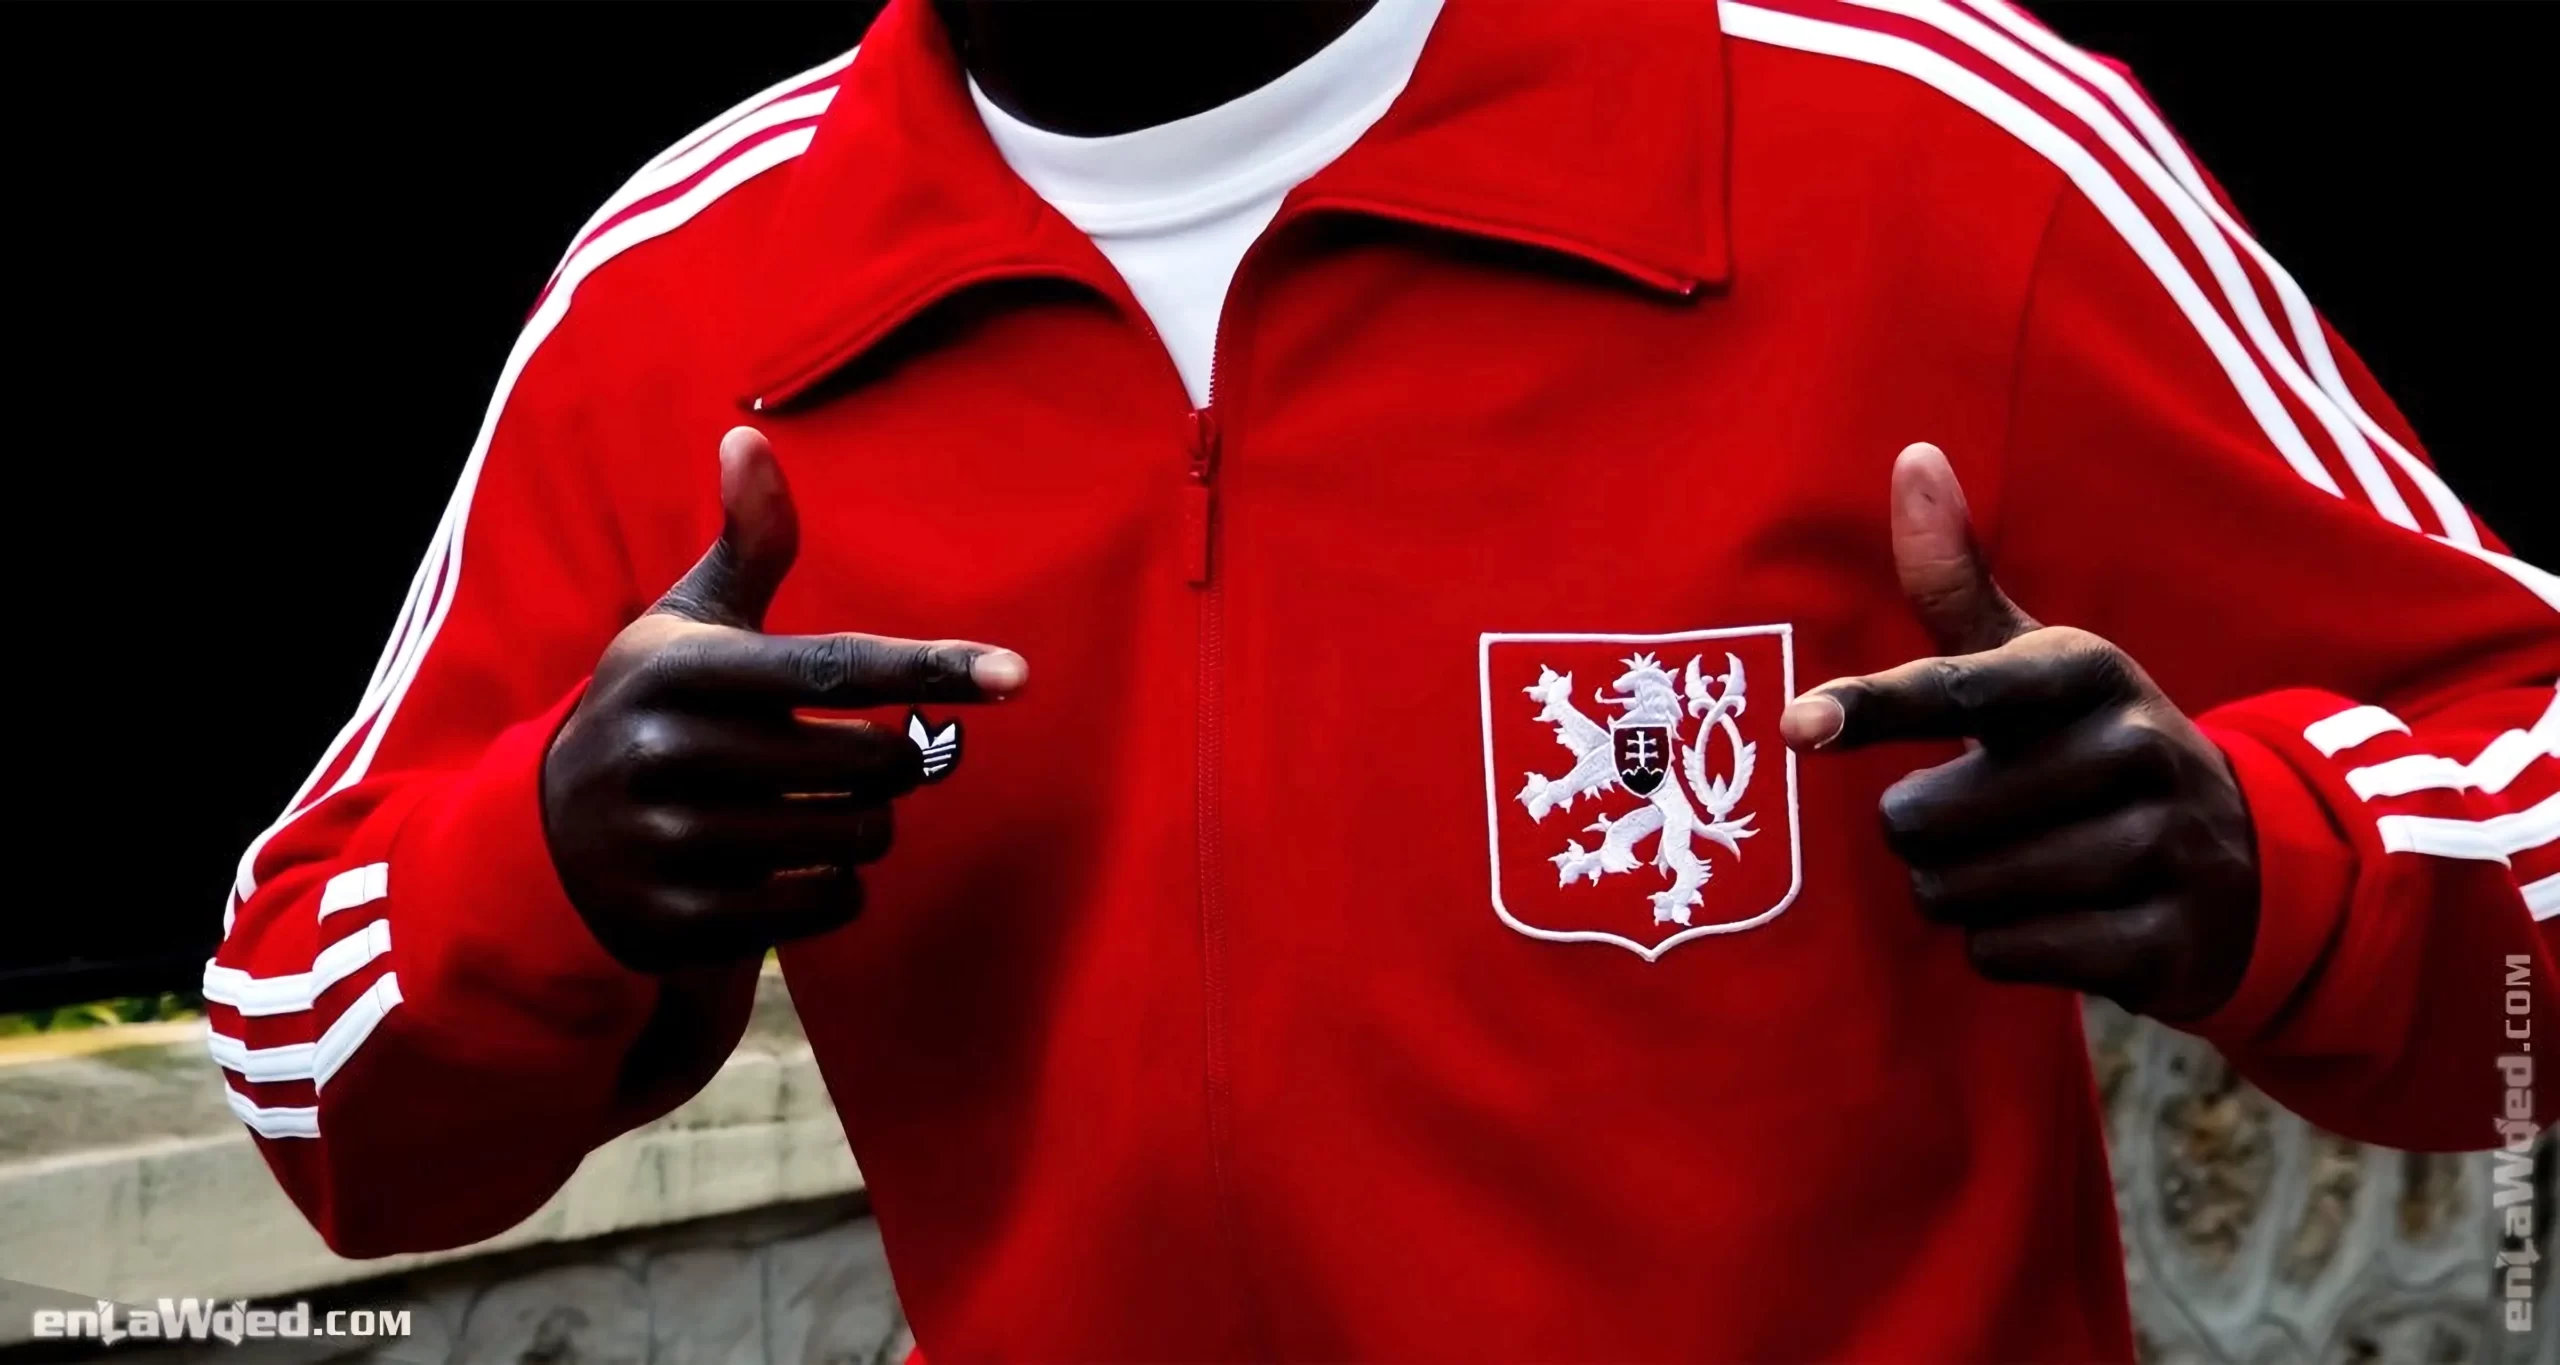 Men’s 2007 Slovakia Love Track Top by Adidas Originals: Uncovered (EnLawded.com file #lmcgfw6f112sqkfc4t3r)